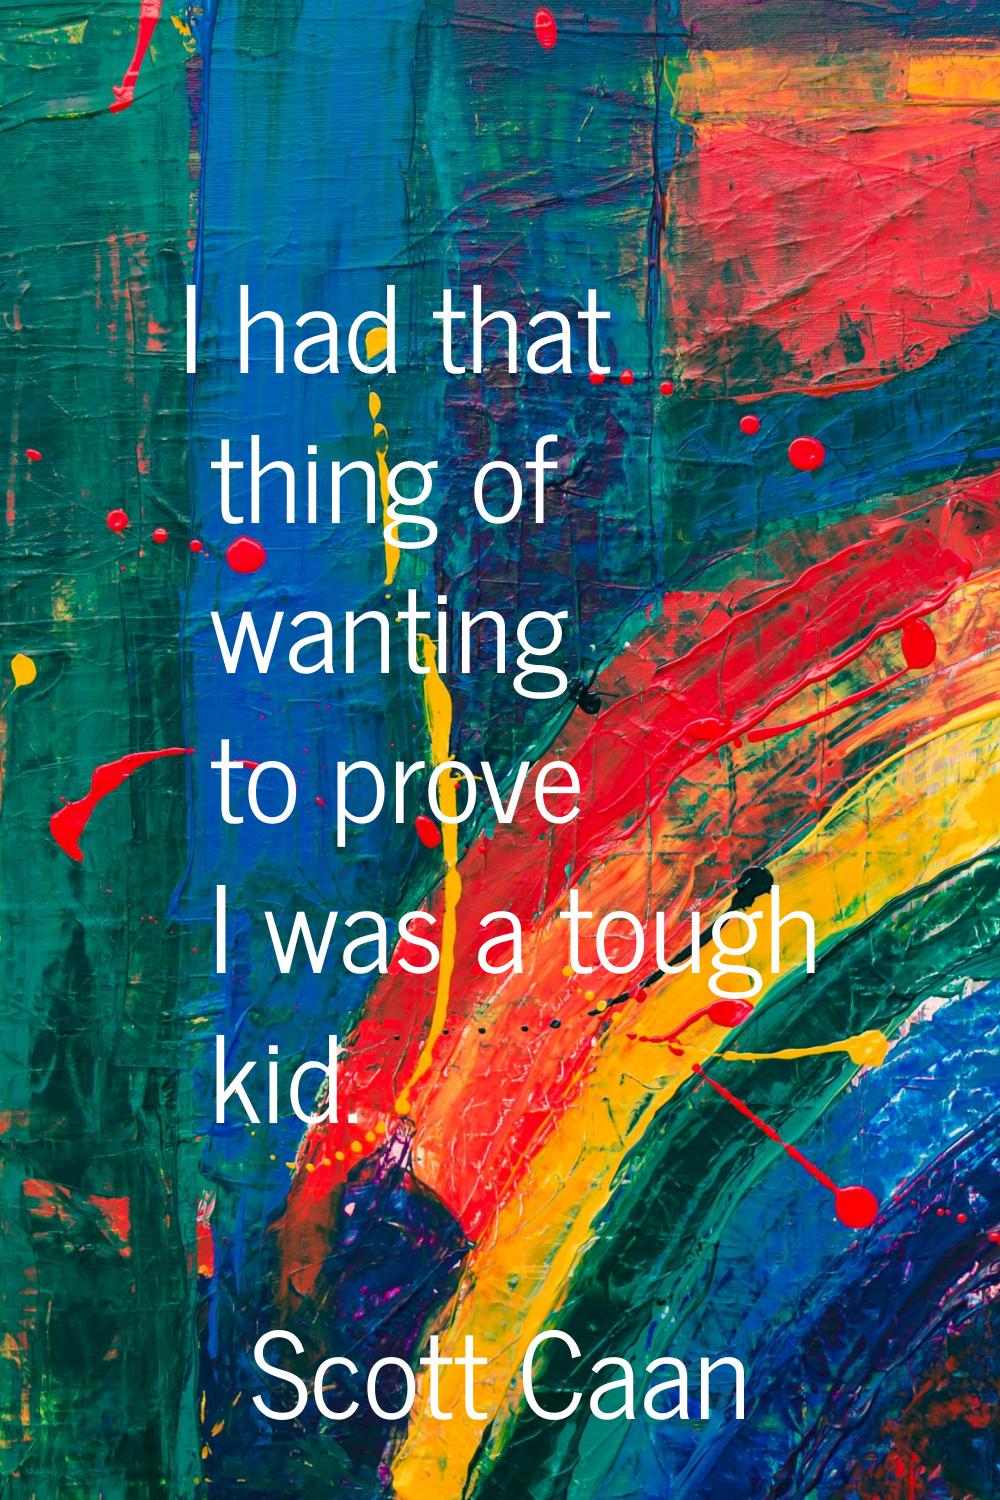 I had that thing of wanting to prove I was a tough kid.